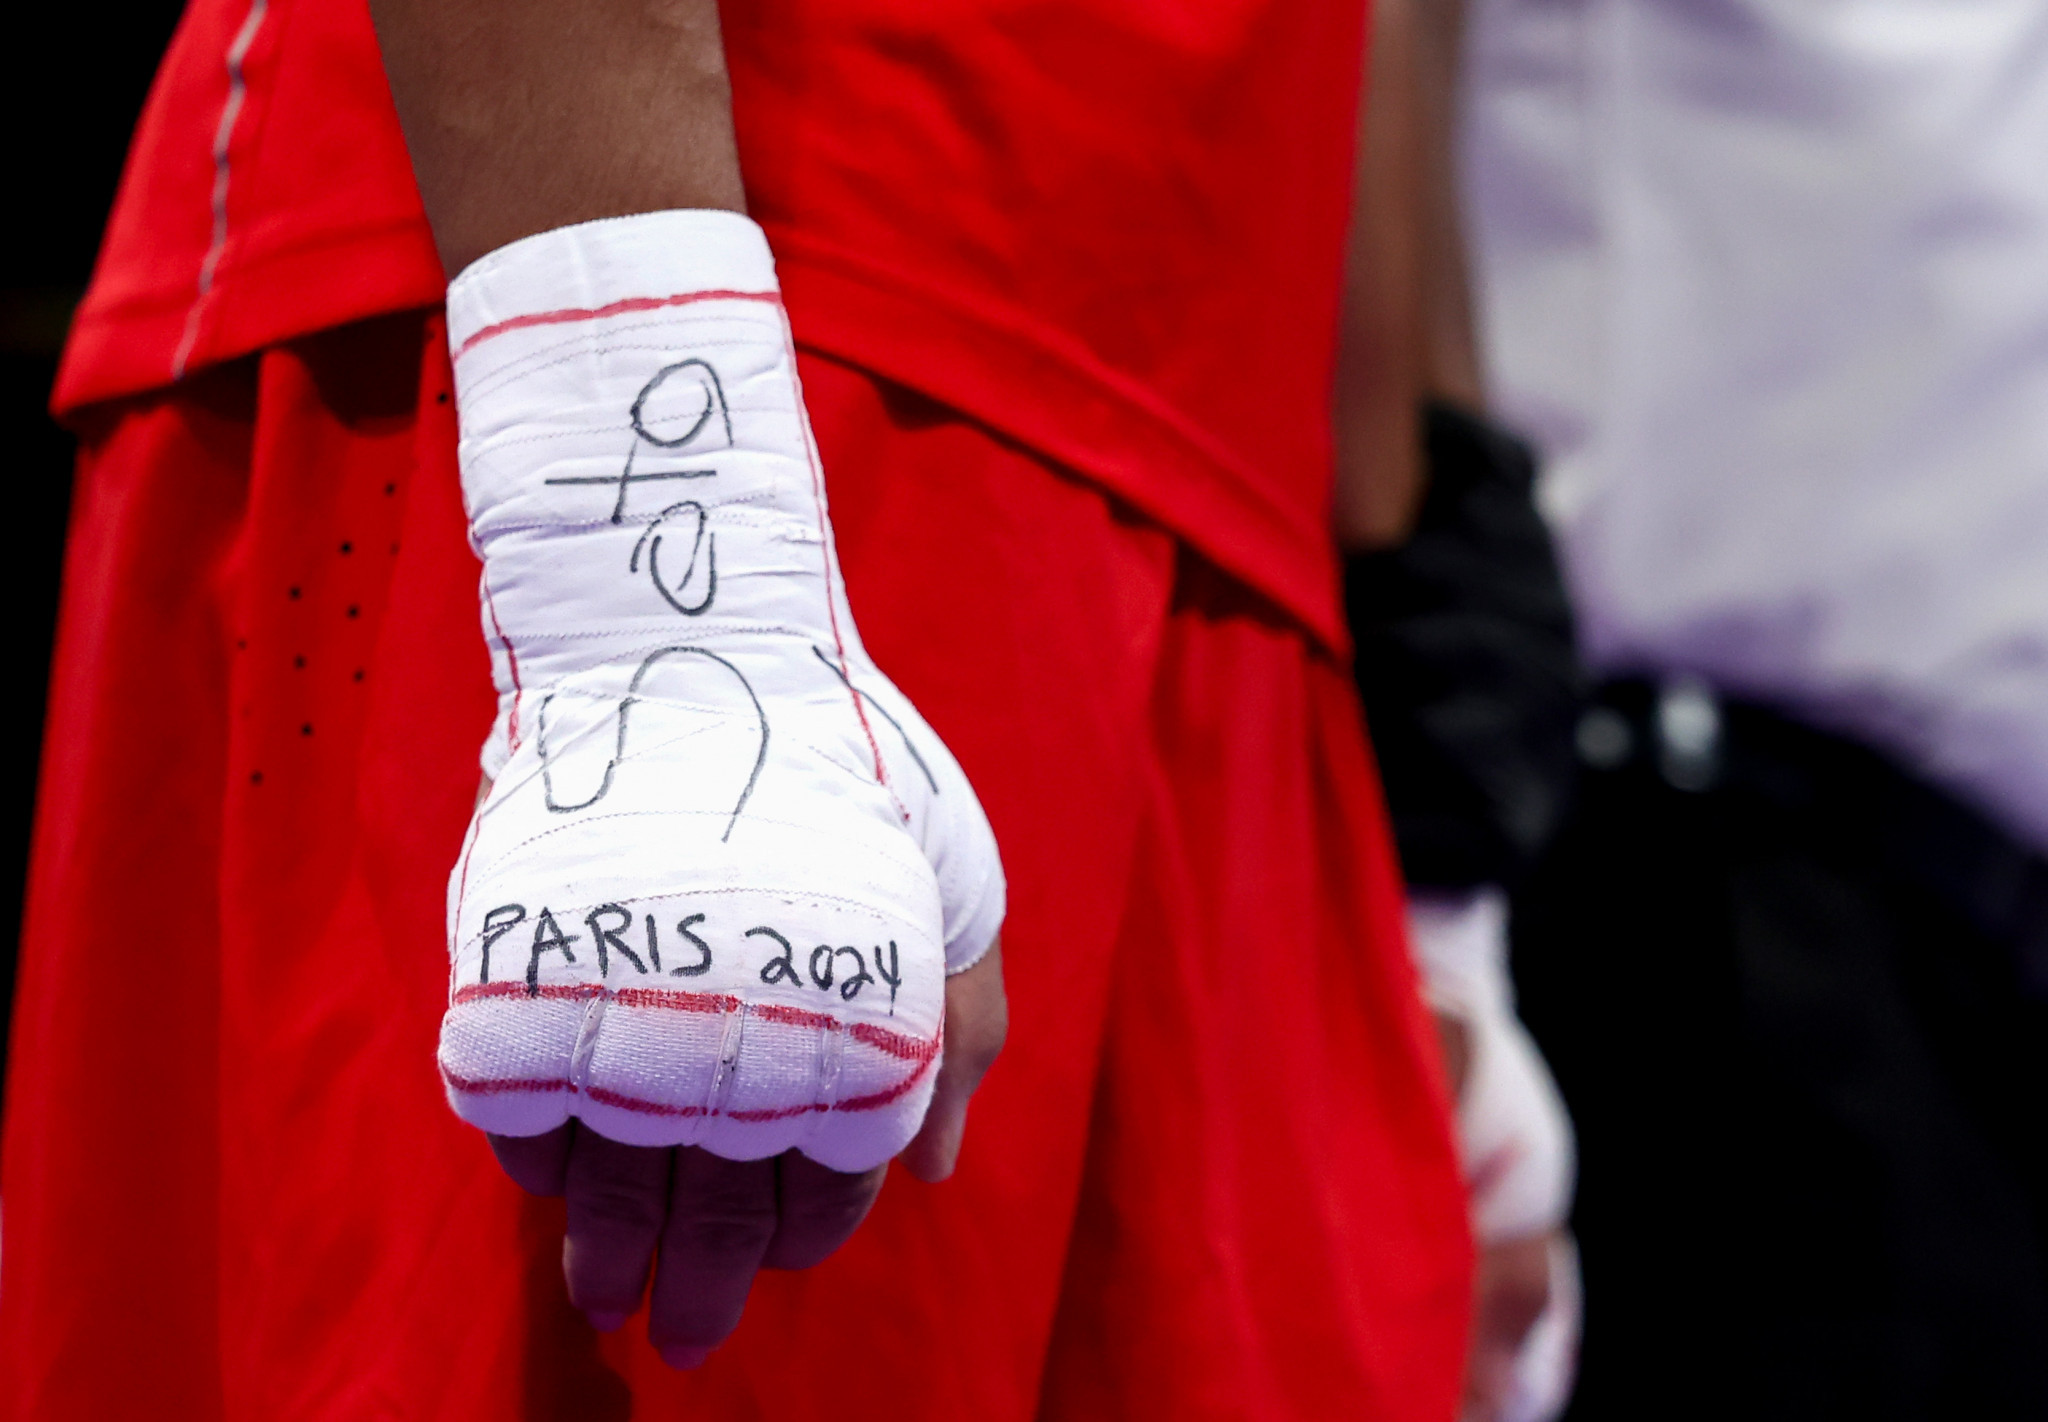 Photo of Imane Khelif's fist. GETTY IMAGES